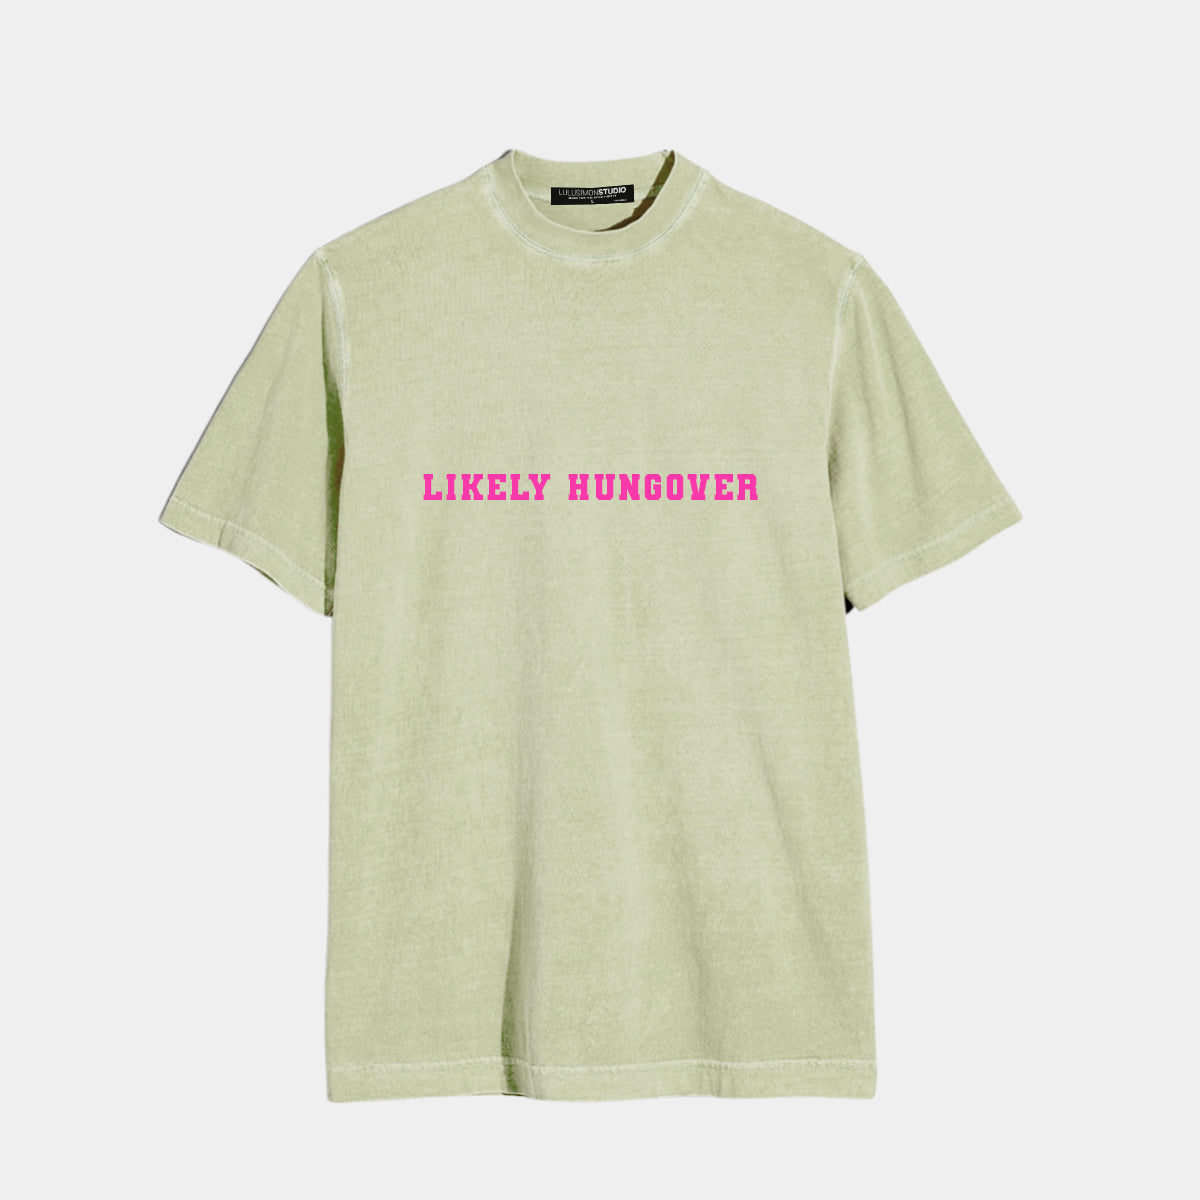 Likely Hungover Pigment Dye Tee